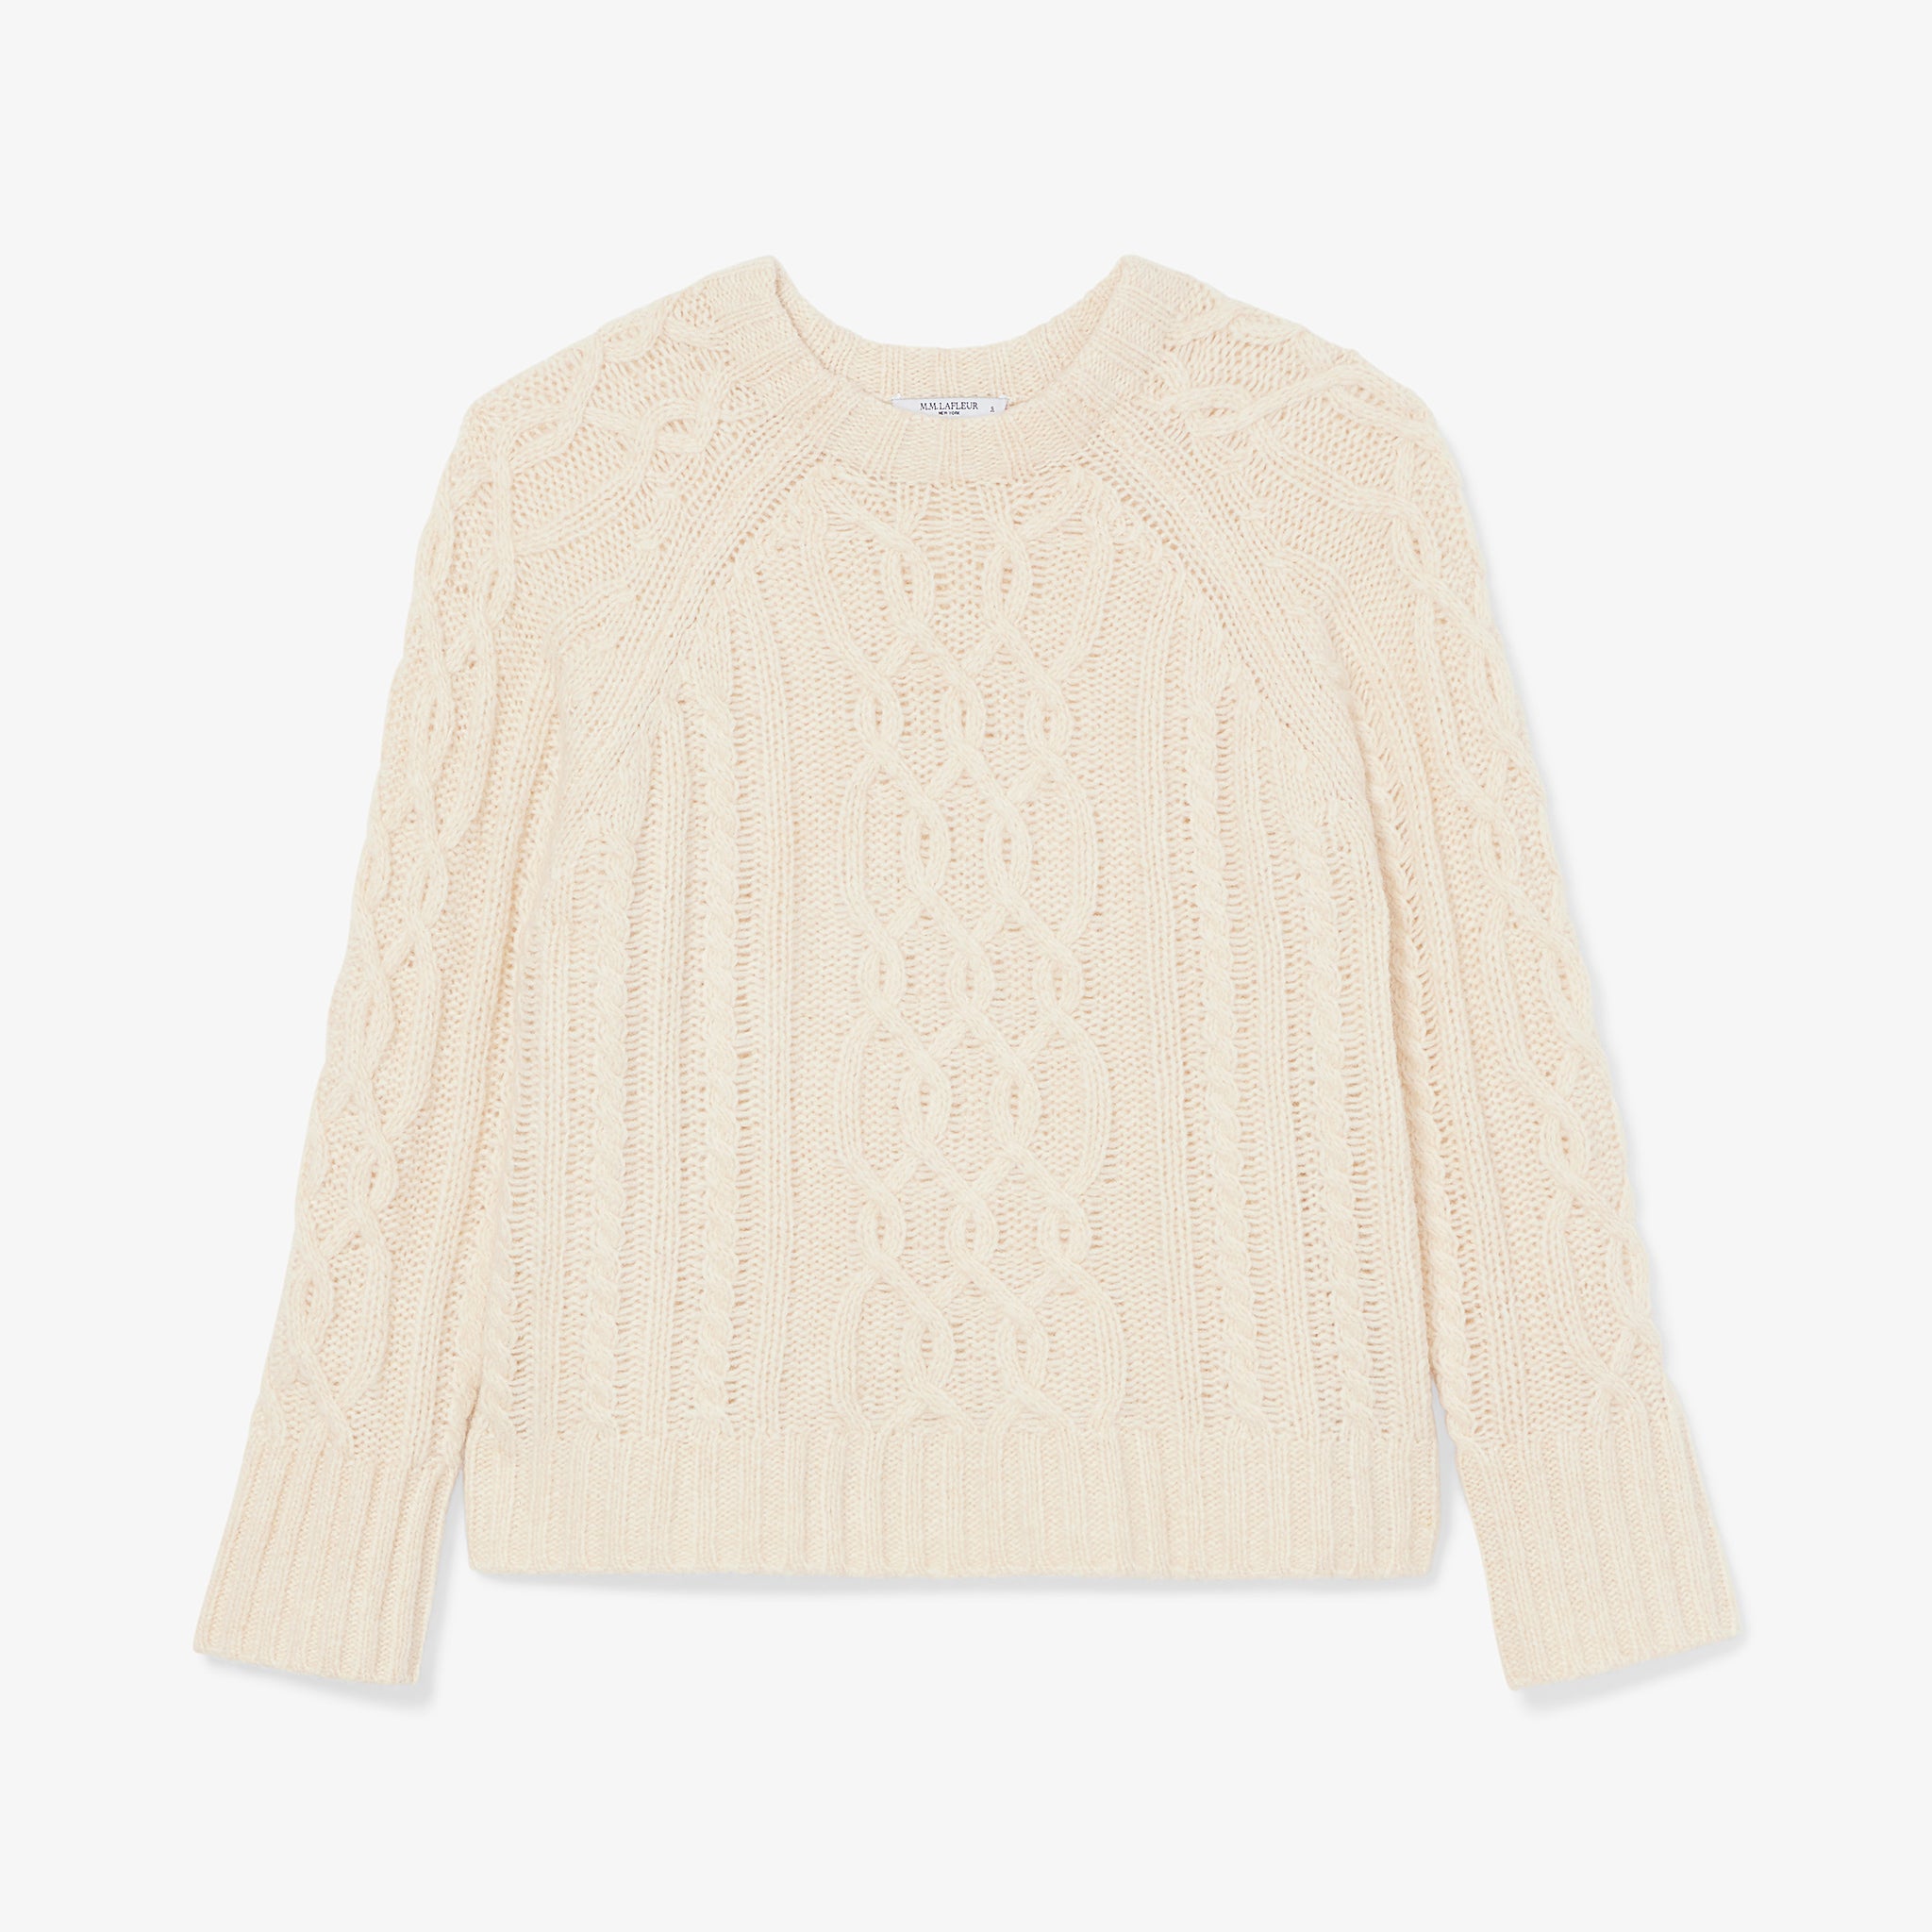 Packshot image of the somers sweater in ivory